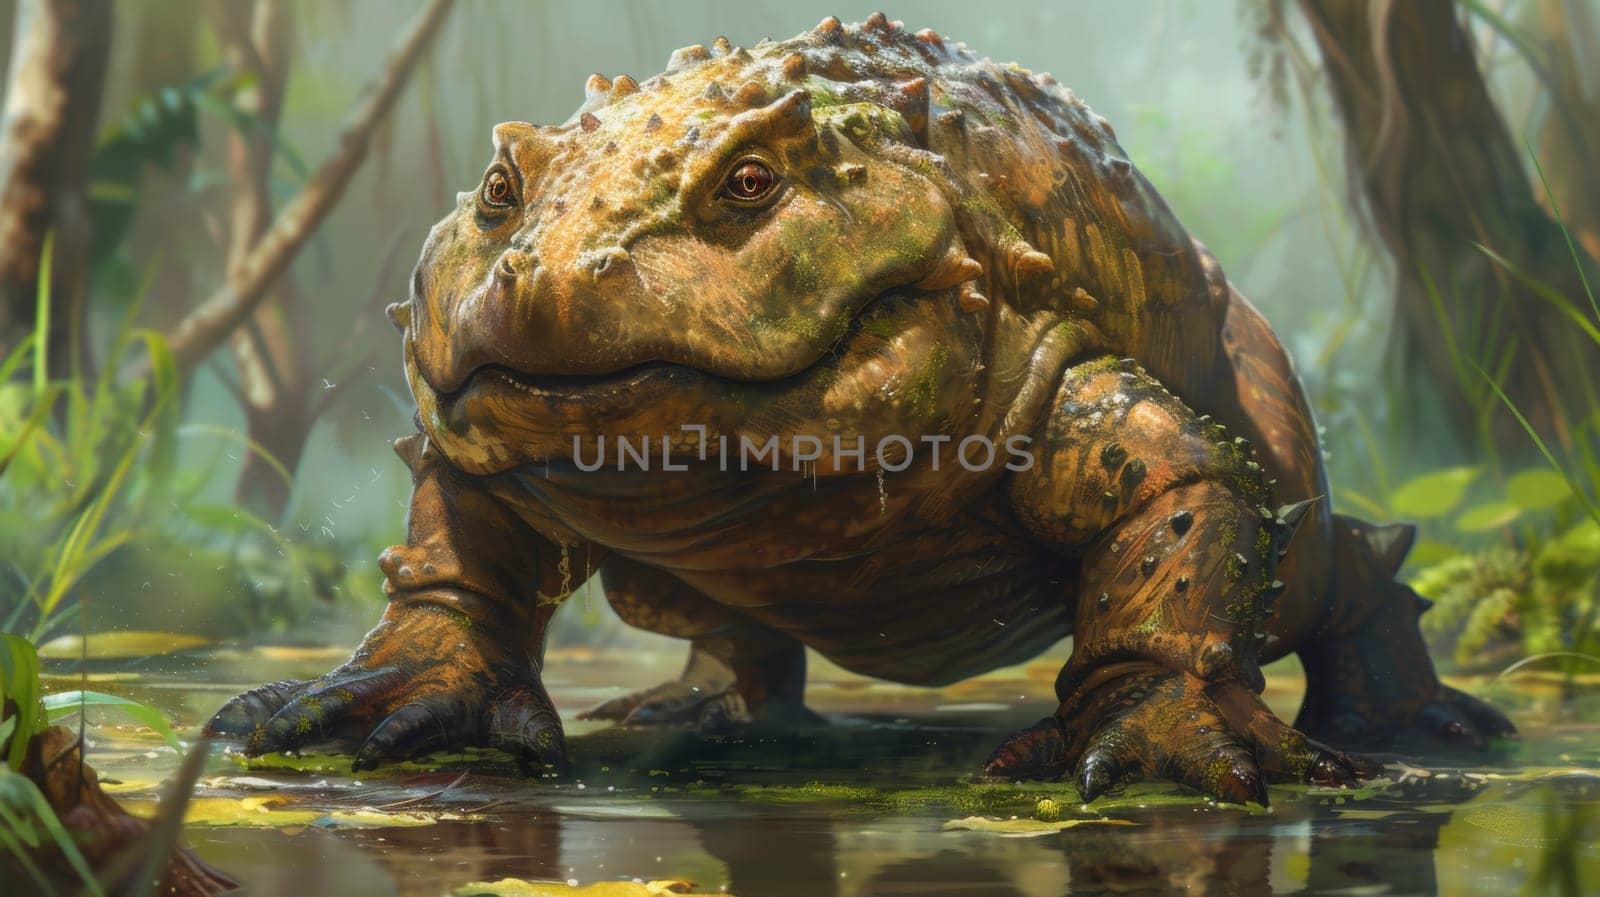 A large lizard standing in a swampy area with trees around it, AI by starush